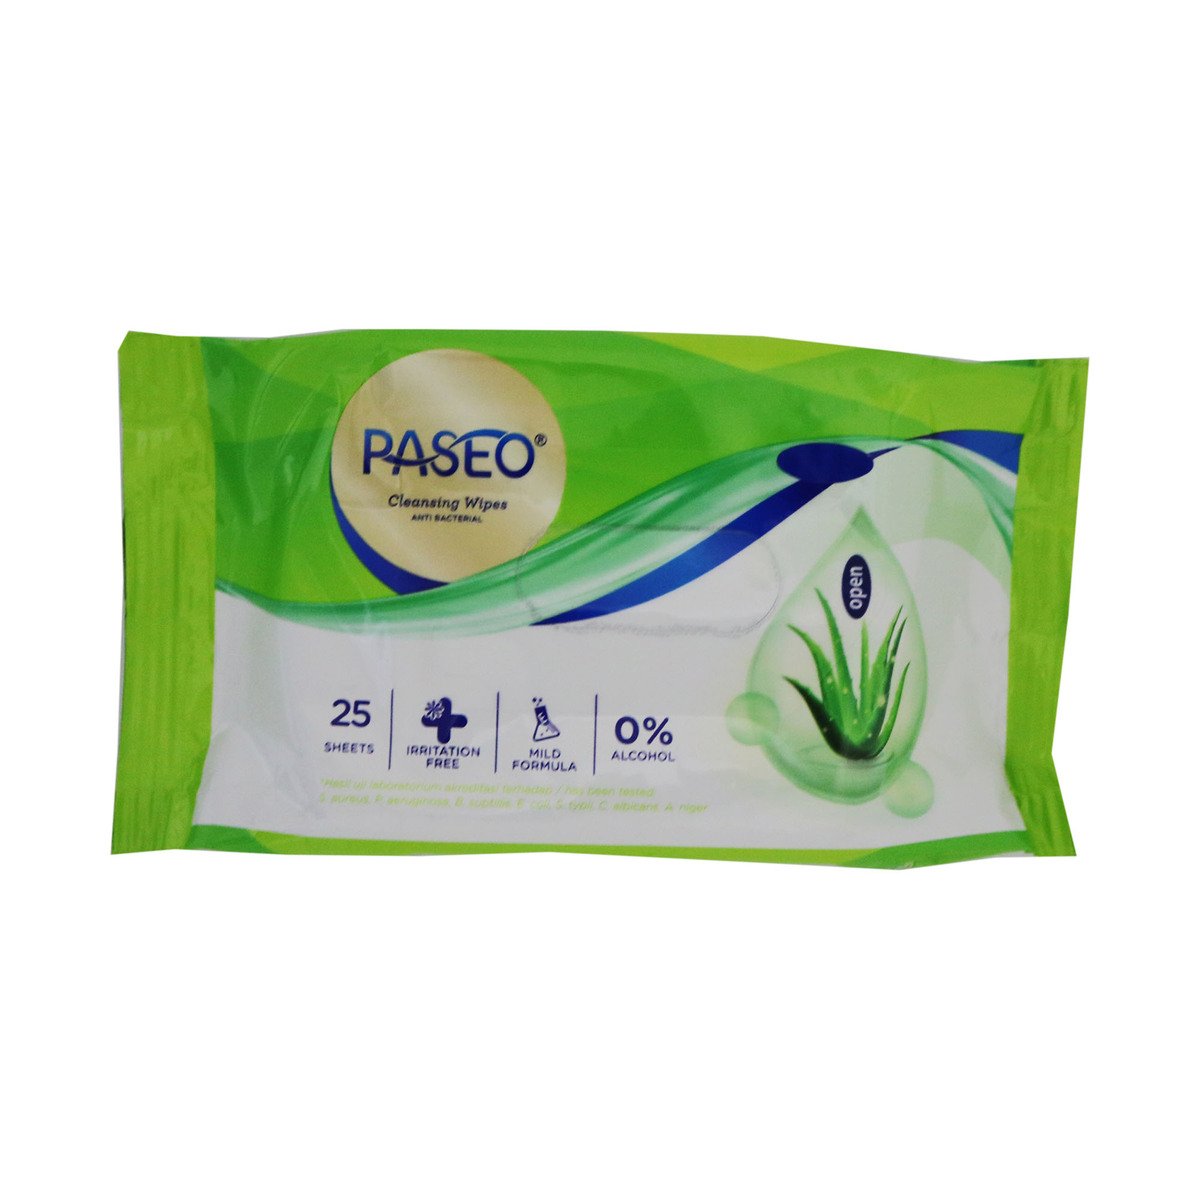 Paseo Cleansing Wipes Anti Bacterial B1G1 25s